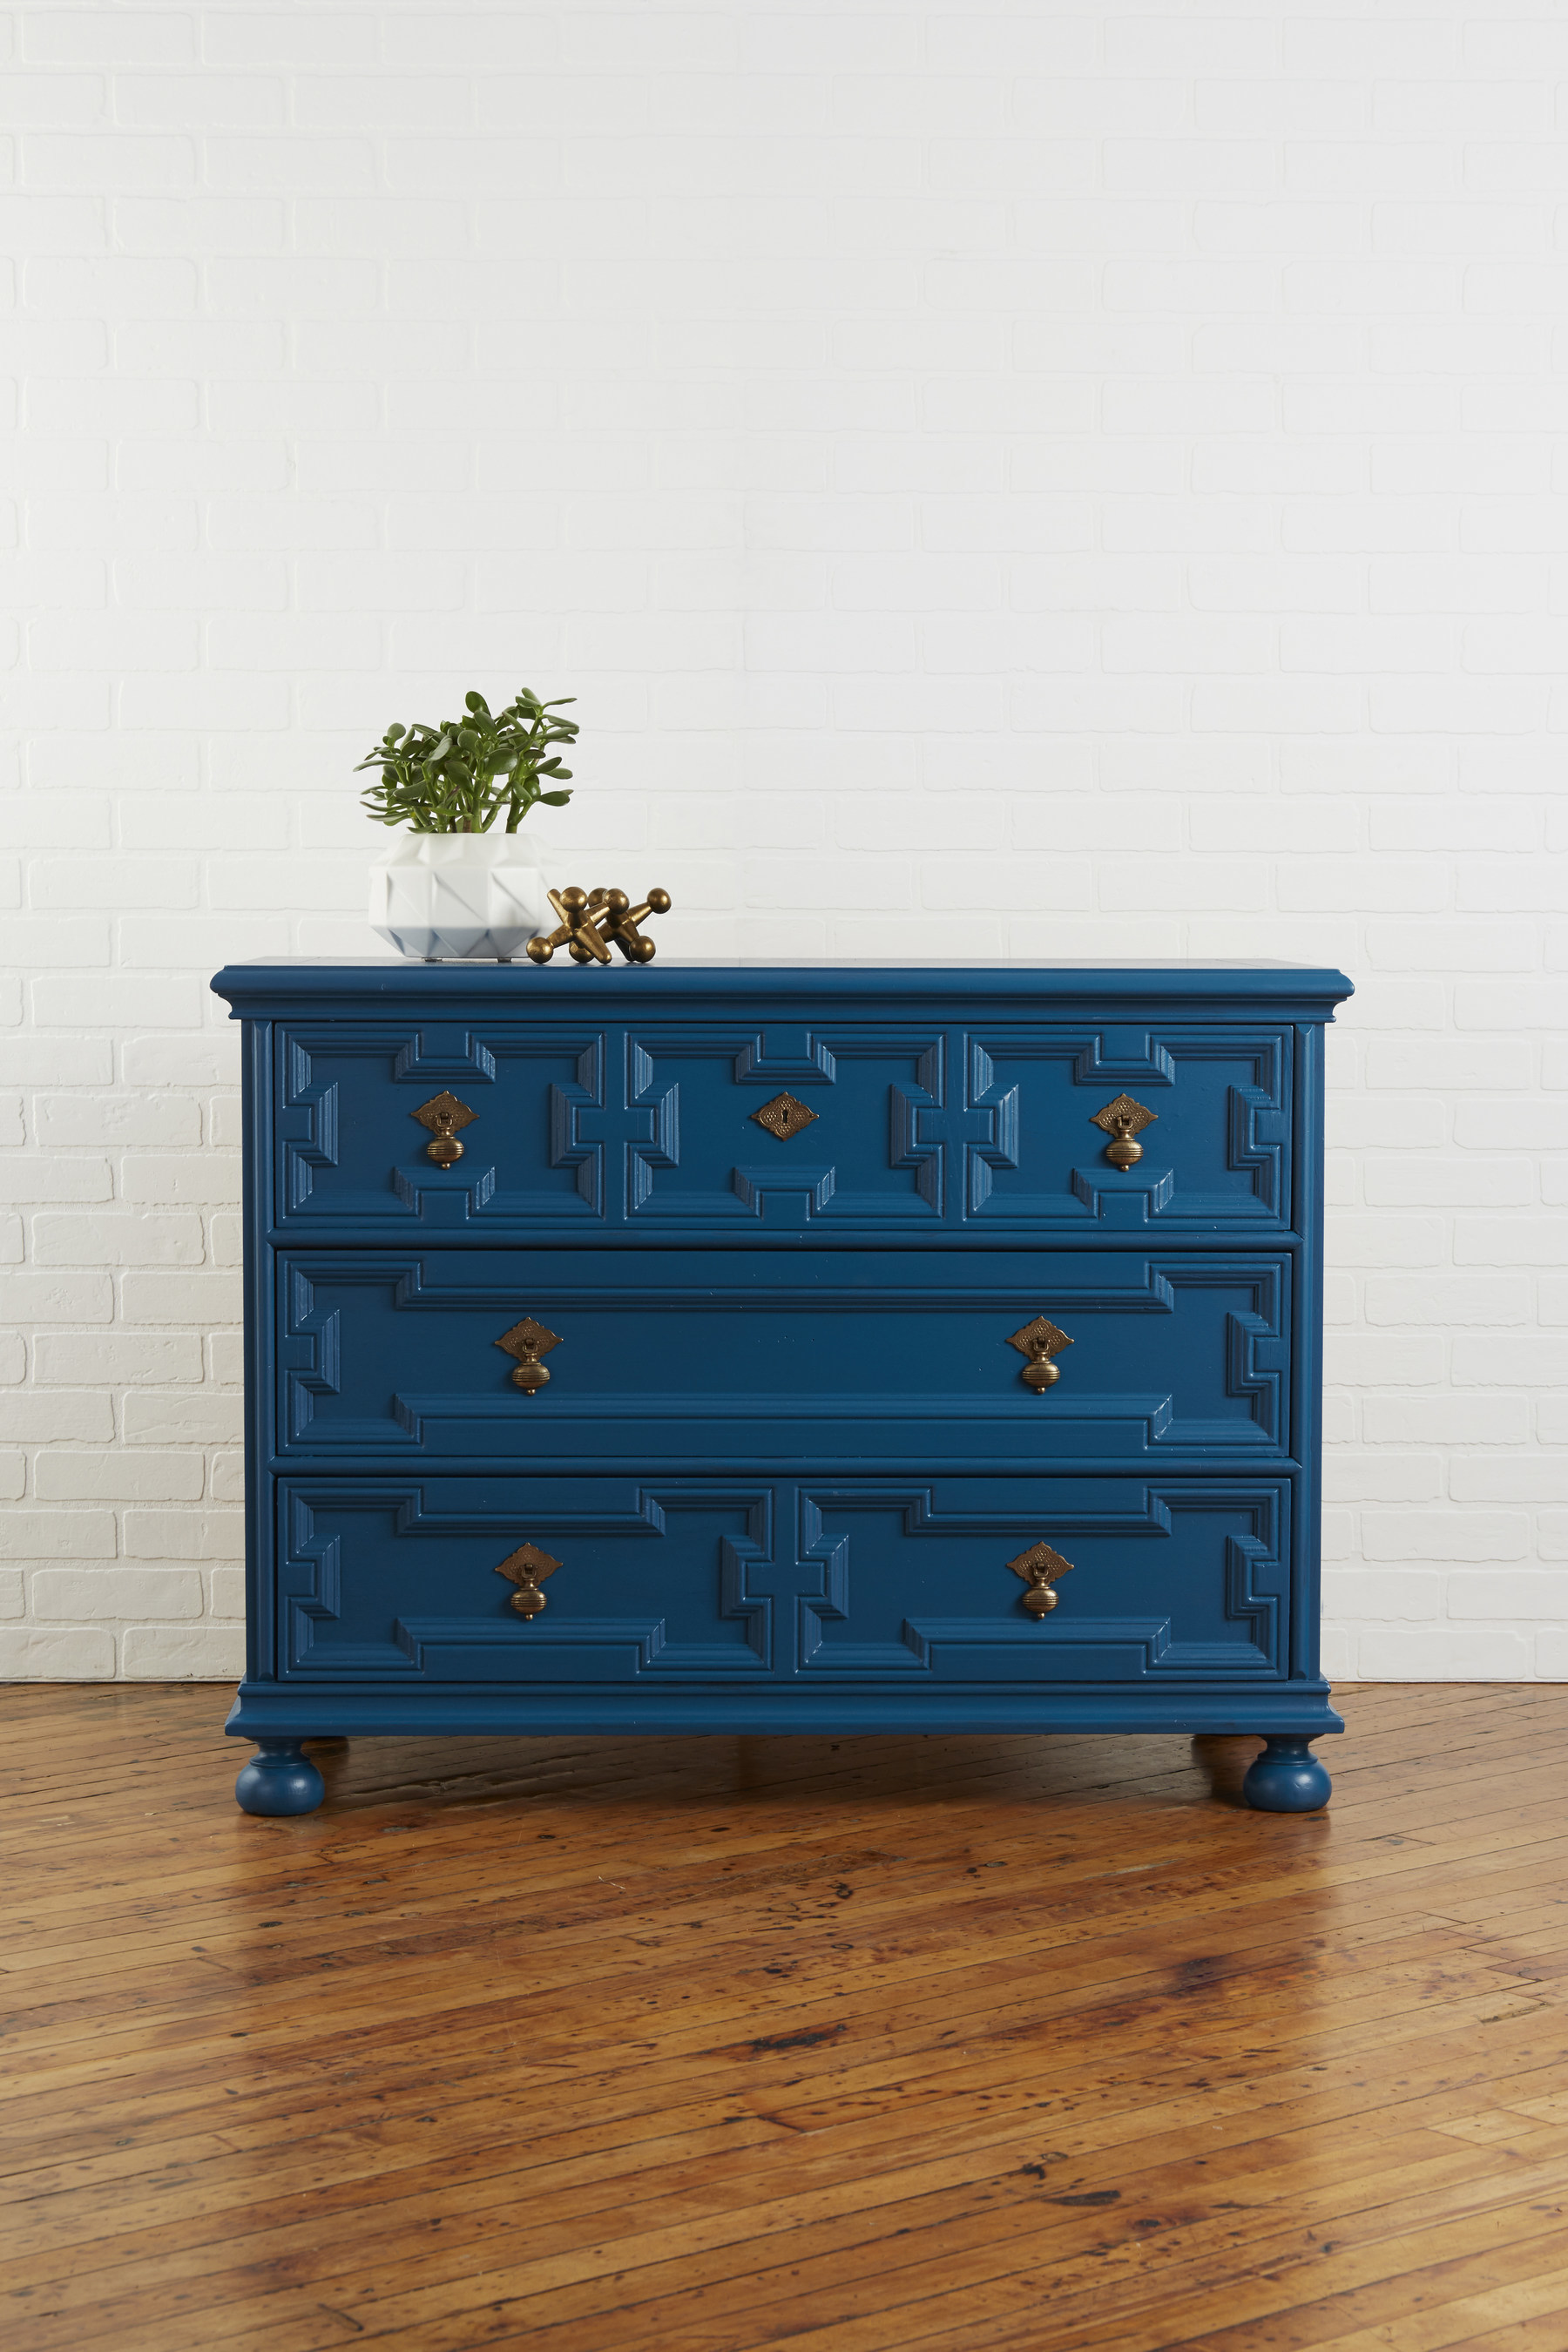 Valspar Paint introduces two new specialty products - Furniture Paint and Cabinet Enamel. The paints are the linchpin to Valspar's new cheeky PSA-style digital campaign named #TheRehabProject which encourages consumers to rescue and refurbish old discarded furniture through inspiration and how-to videos.